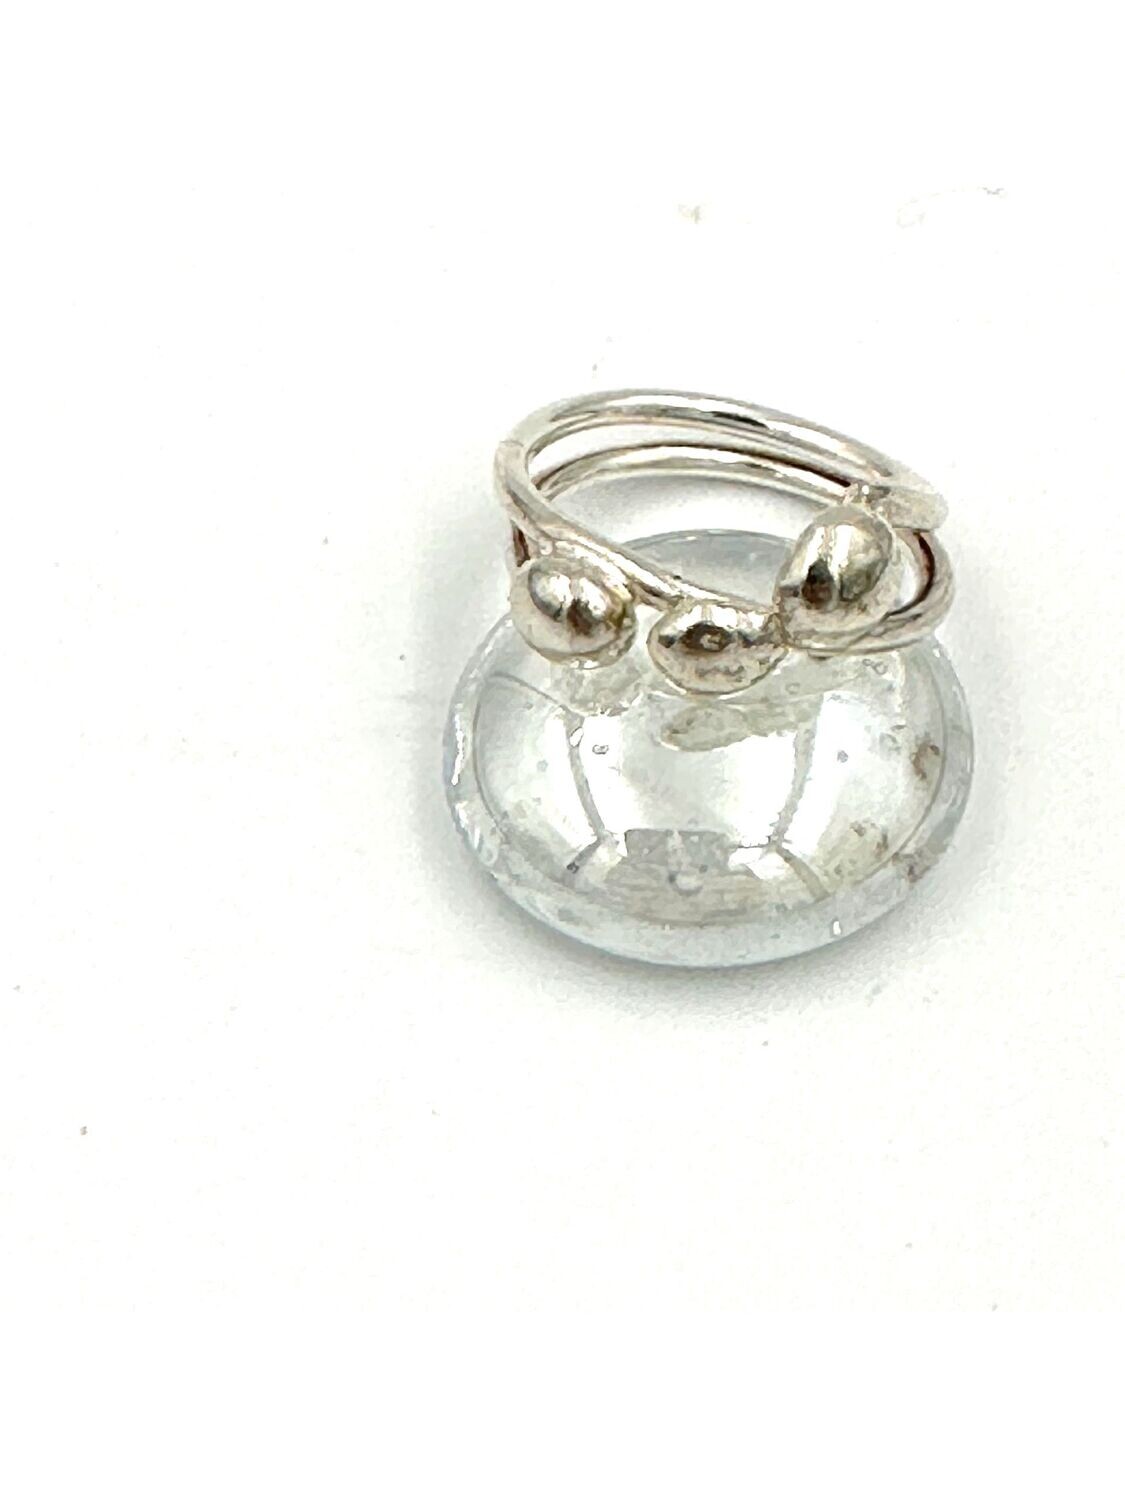 3 wire ring with silver accents